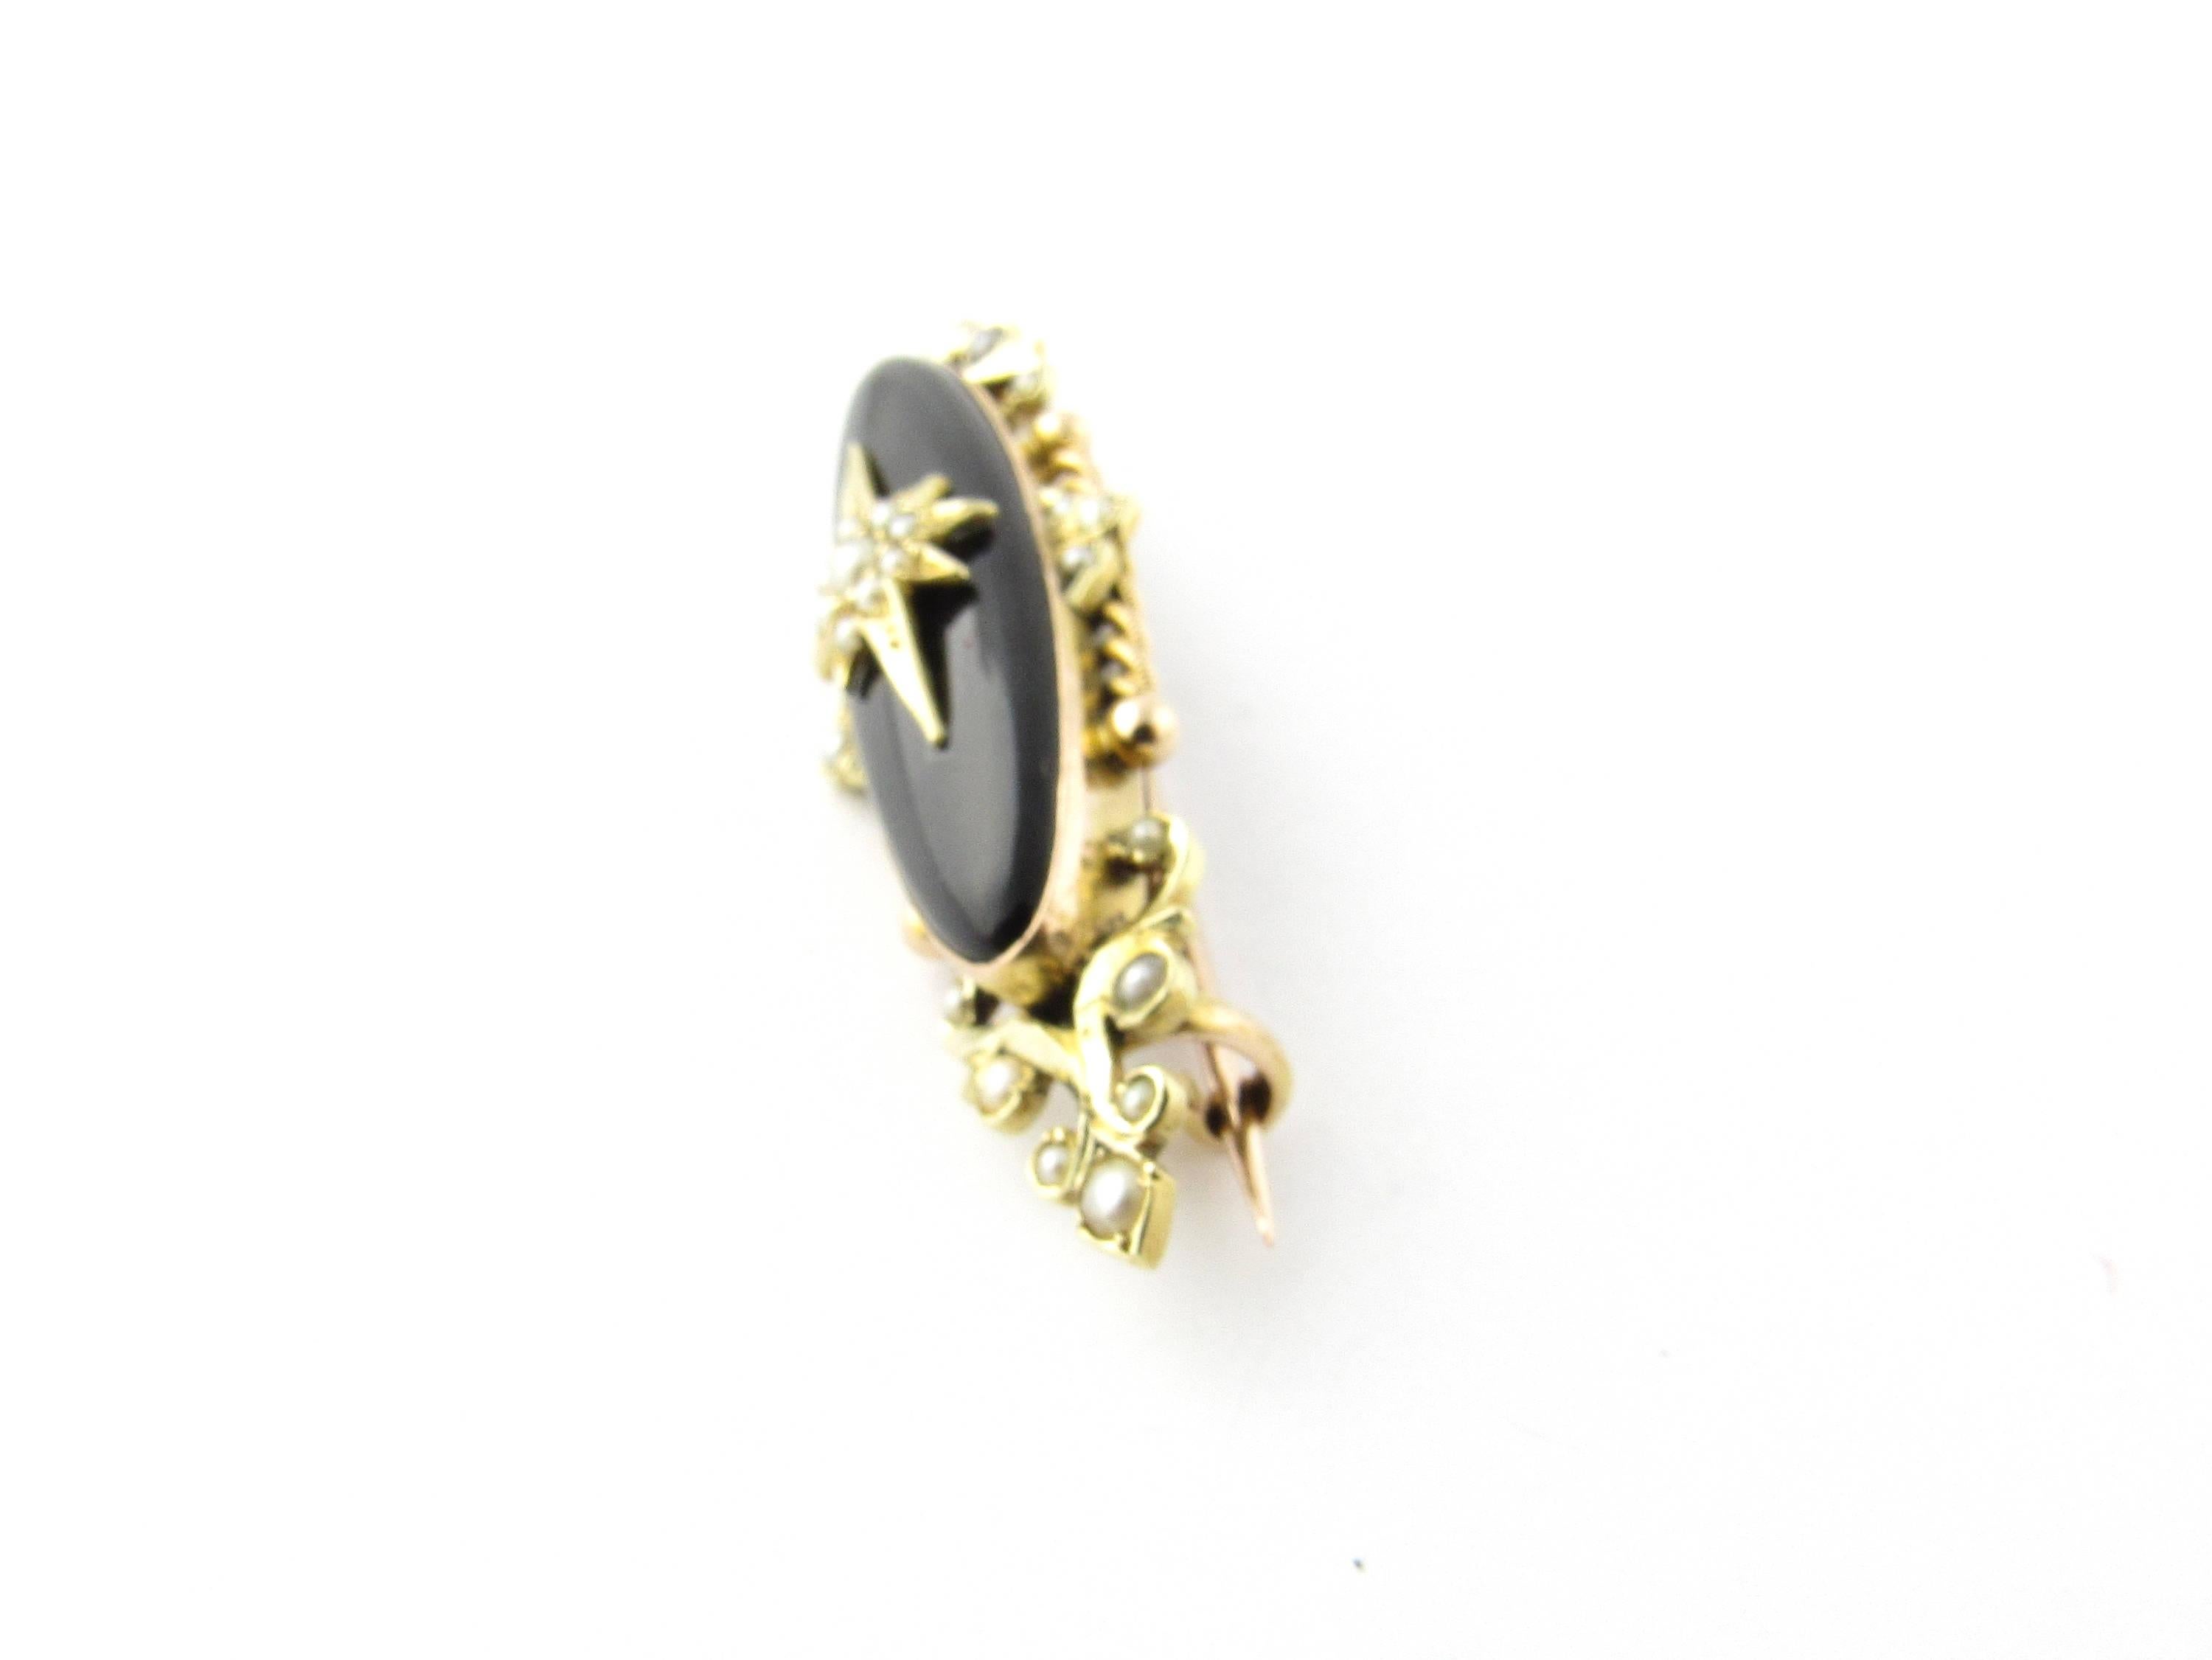 Vintage 10 Karat Yellow Gold Black Onyx and Pearl Brooch- 
This elegant brooch features an oval black onyx stone accented with 29 seed pearls - set in beautifully detailed yellow gold. 
Size:  48 mm x  14 mm 
Weight:  4.2 dwt. /  6.6 gr. 
Hallmark: